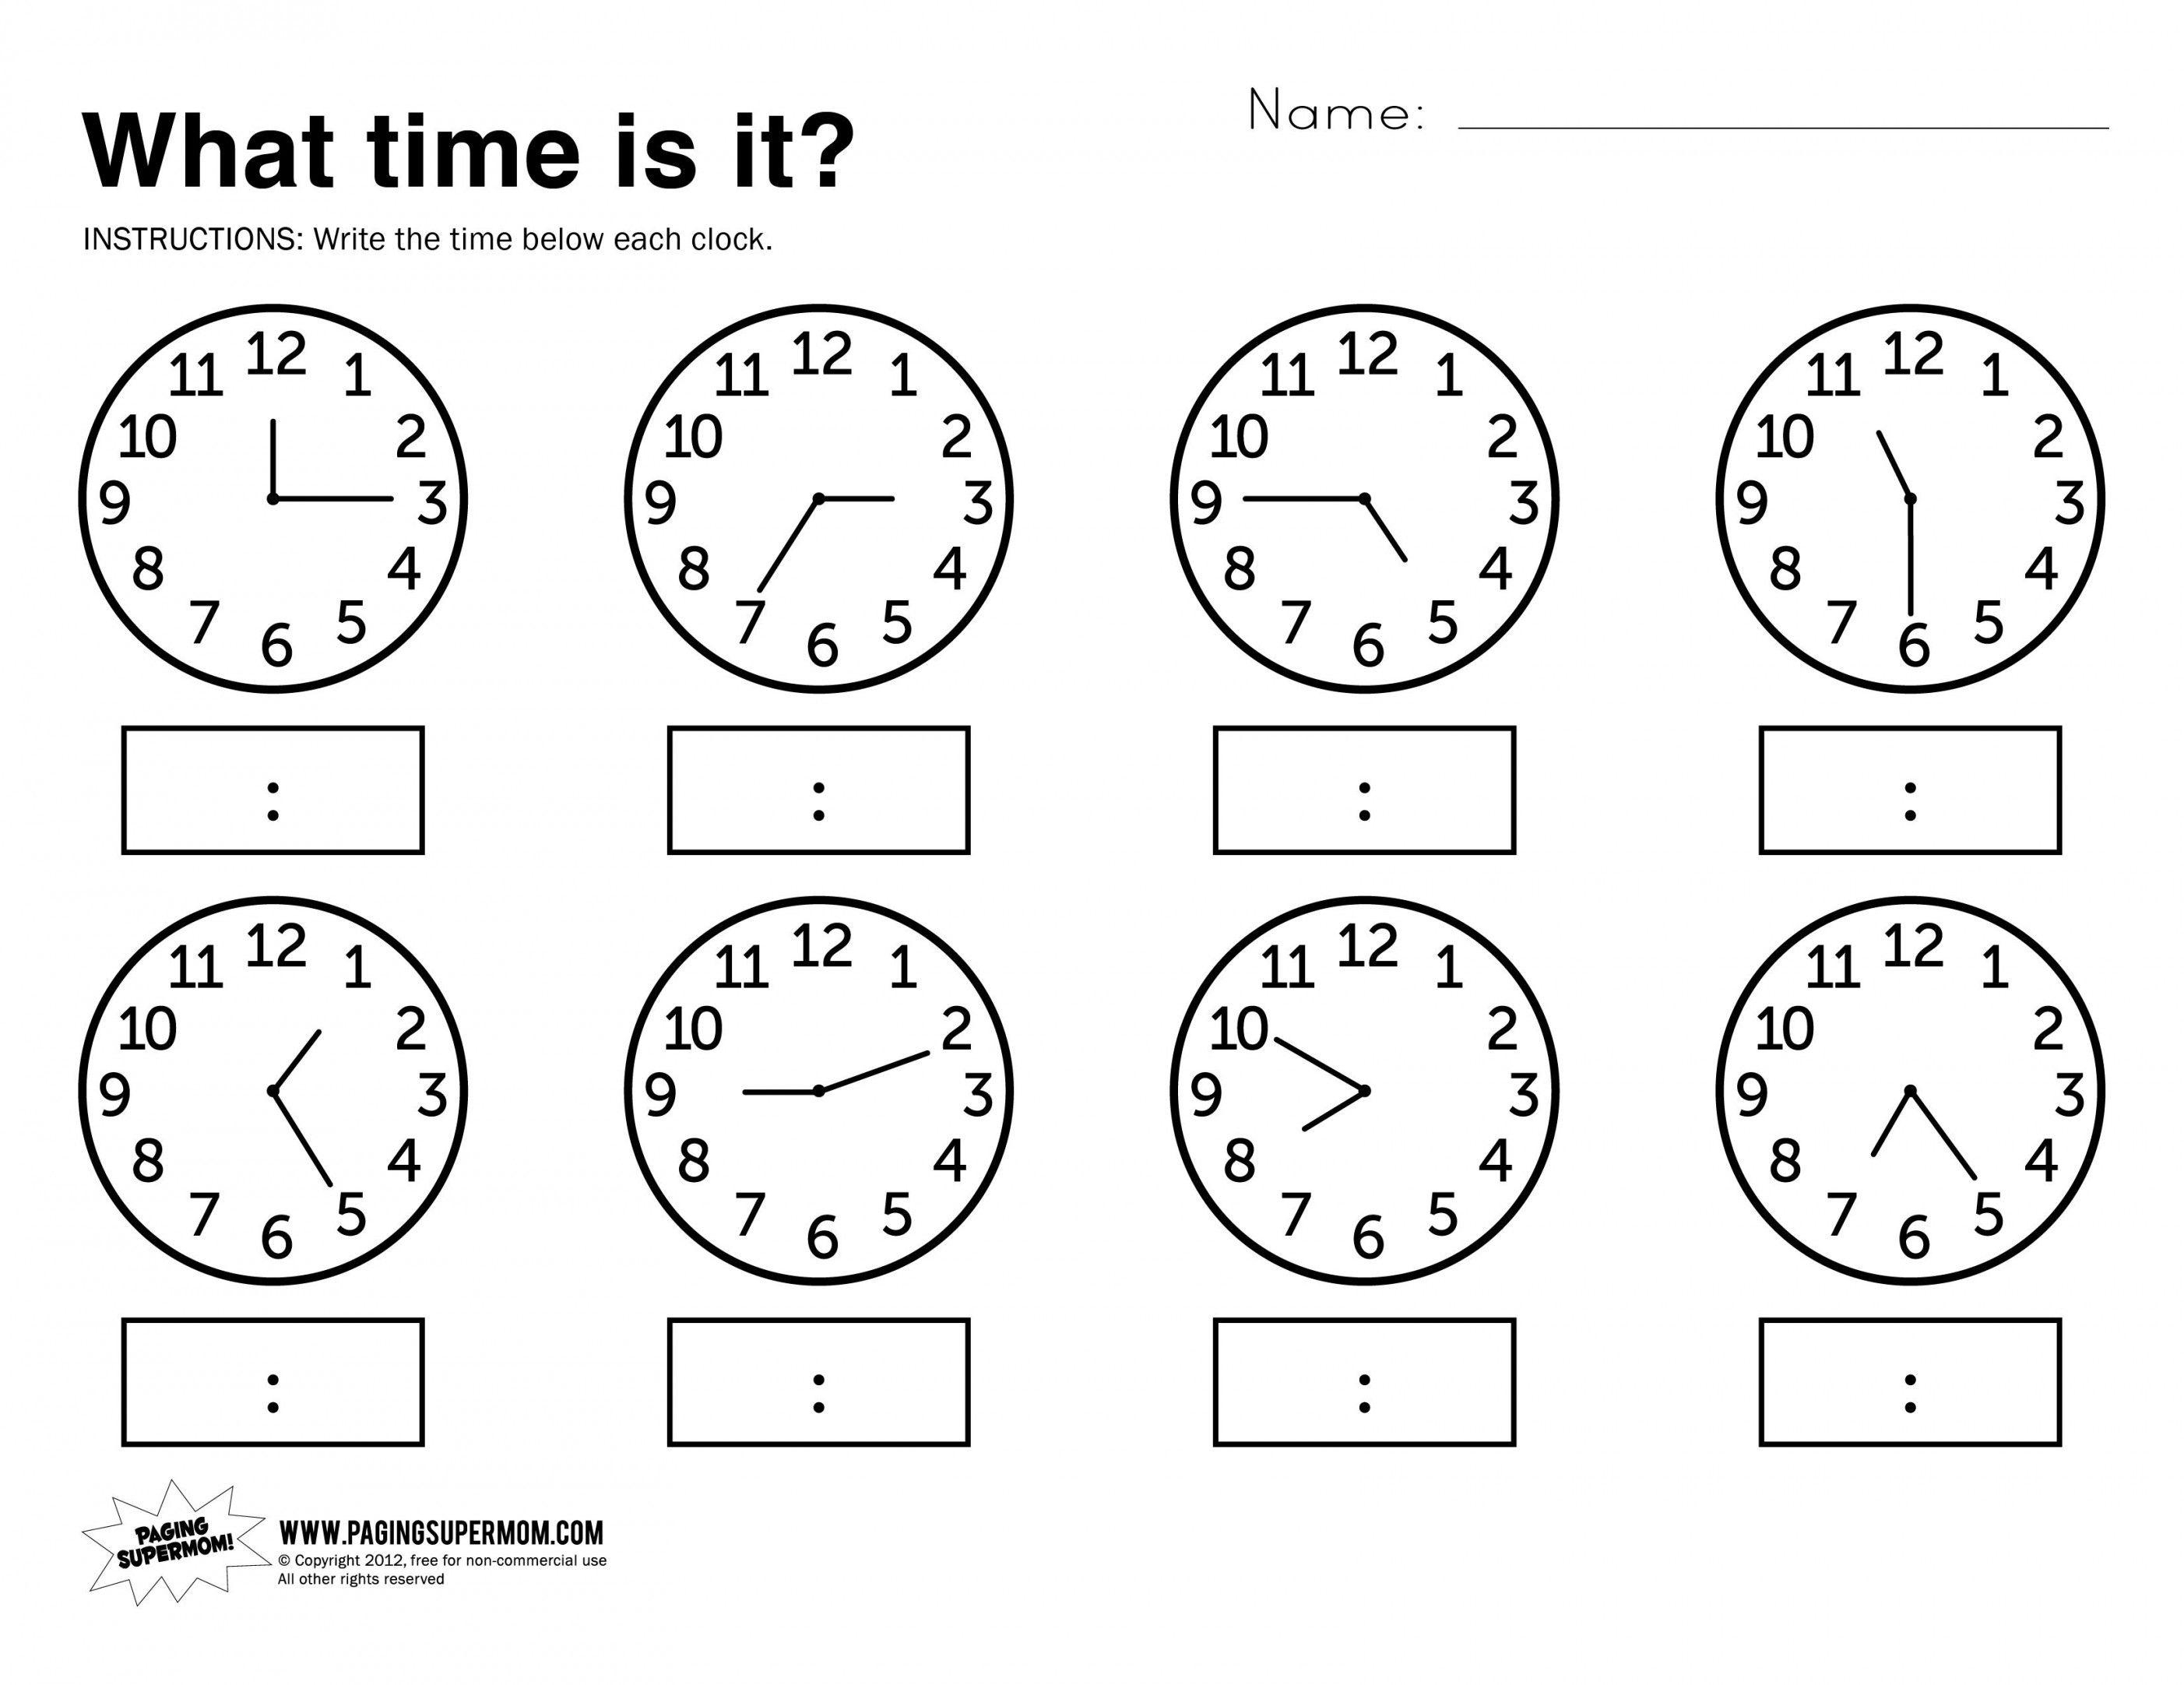 Telling Time Worksheets Grade 3 | Lostranquillos - Free Printable | Free Printable Time Worksheets For Grade 3